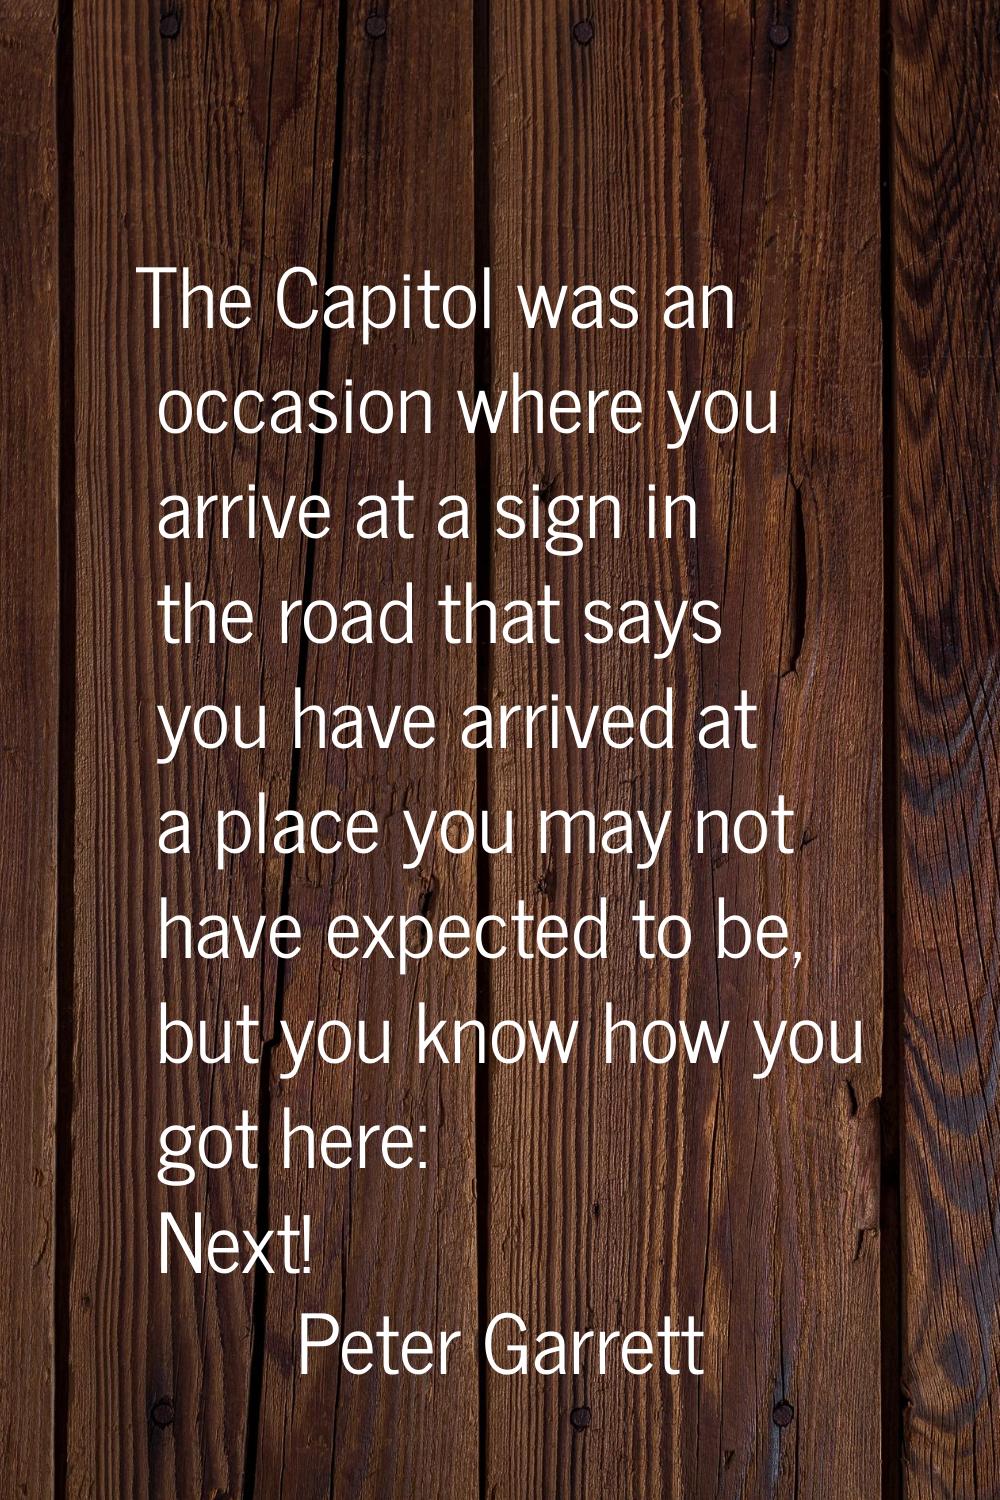 The Capitol was an occasion where you arrive at a sign in the road that says you have arrived at a 